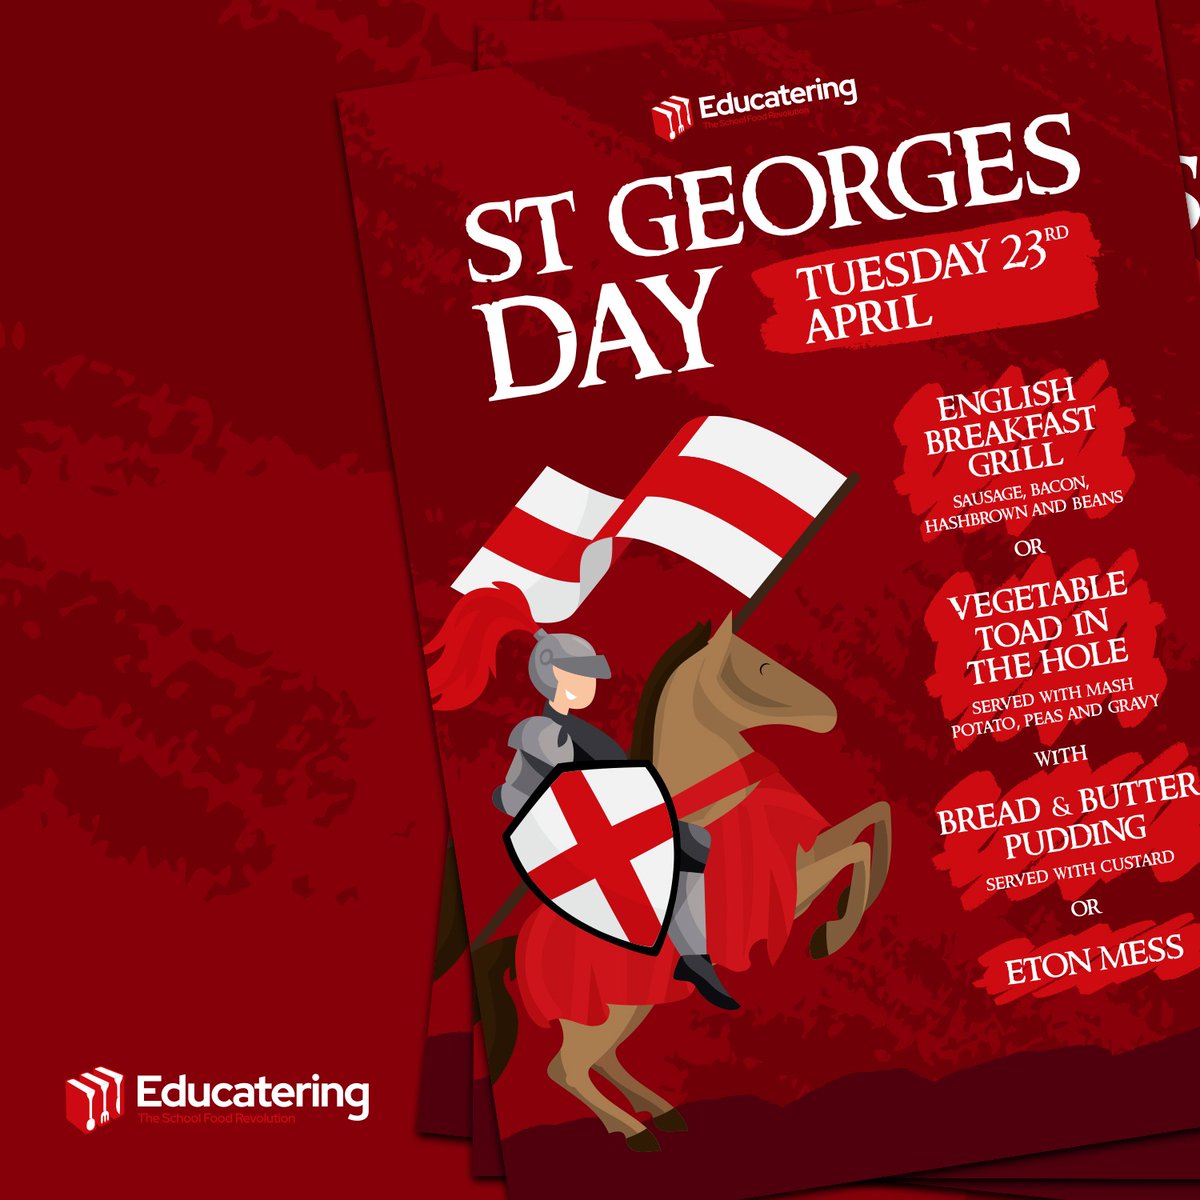 Did you celebrate St. George's Day?

At #Educatering it is a wonderful opportunity to celebrate British culture and traditions.  Here is one of our St Georges Day menus to mark the occasion. 

What were some of the dishes you enjoyed? #stgeorgesday #traditions #greatbritishfood